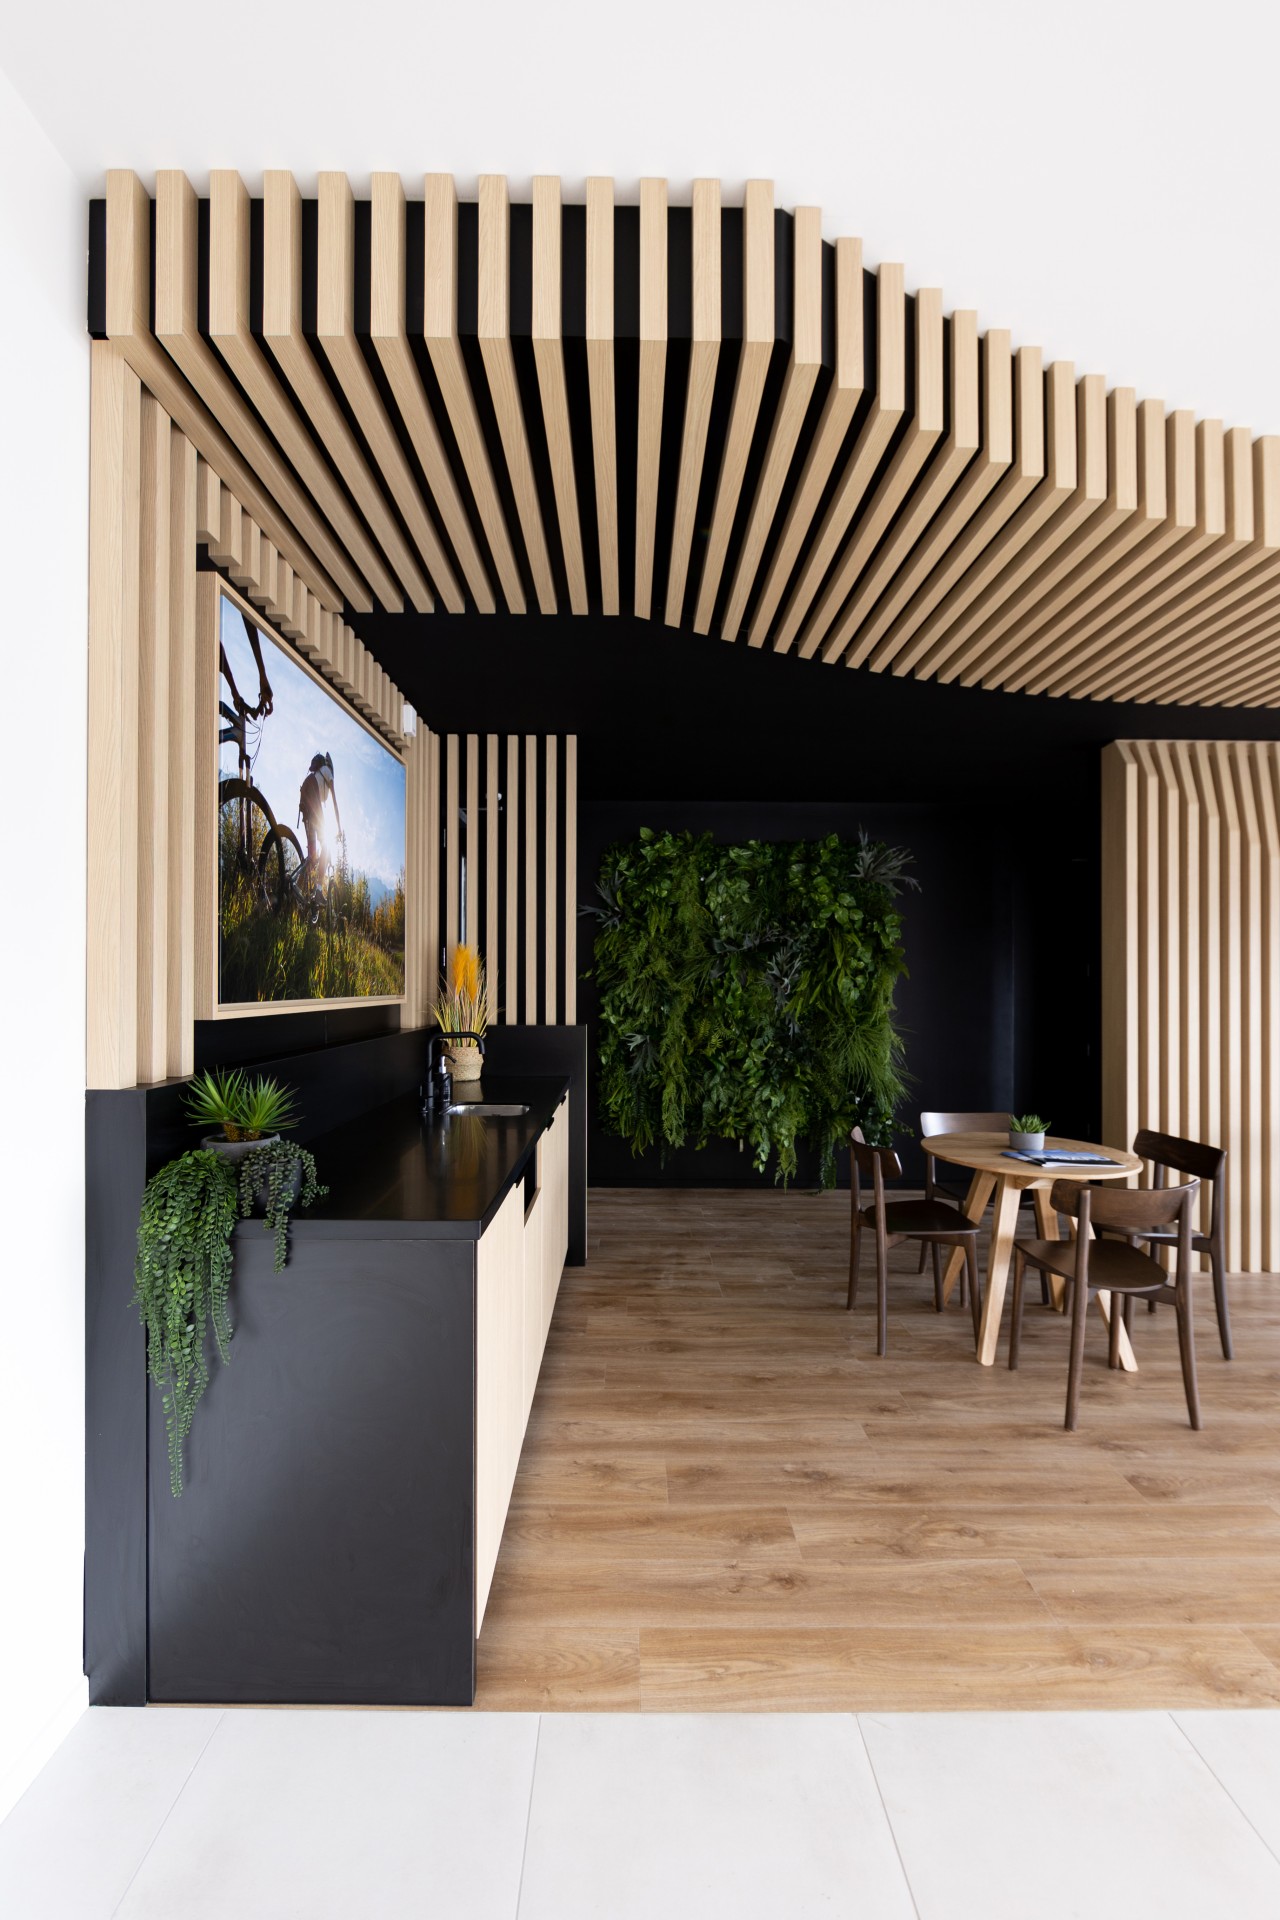 Winger Motors East Auckland brings the outdoors inside with natural materials.